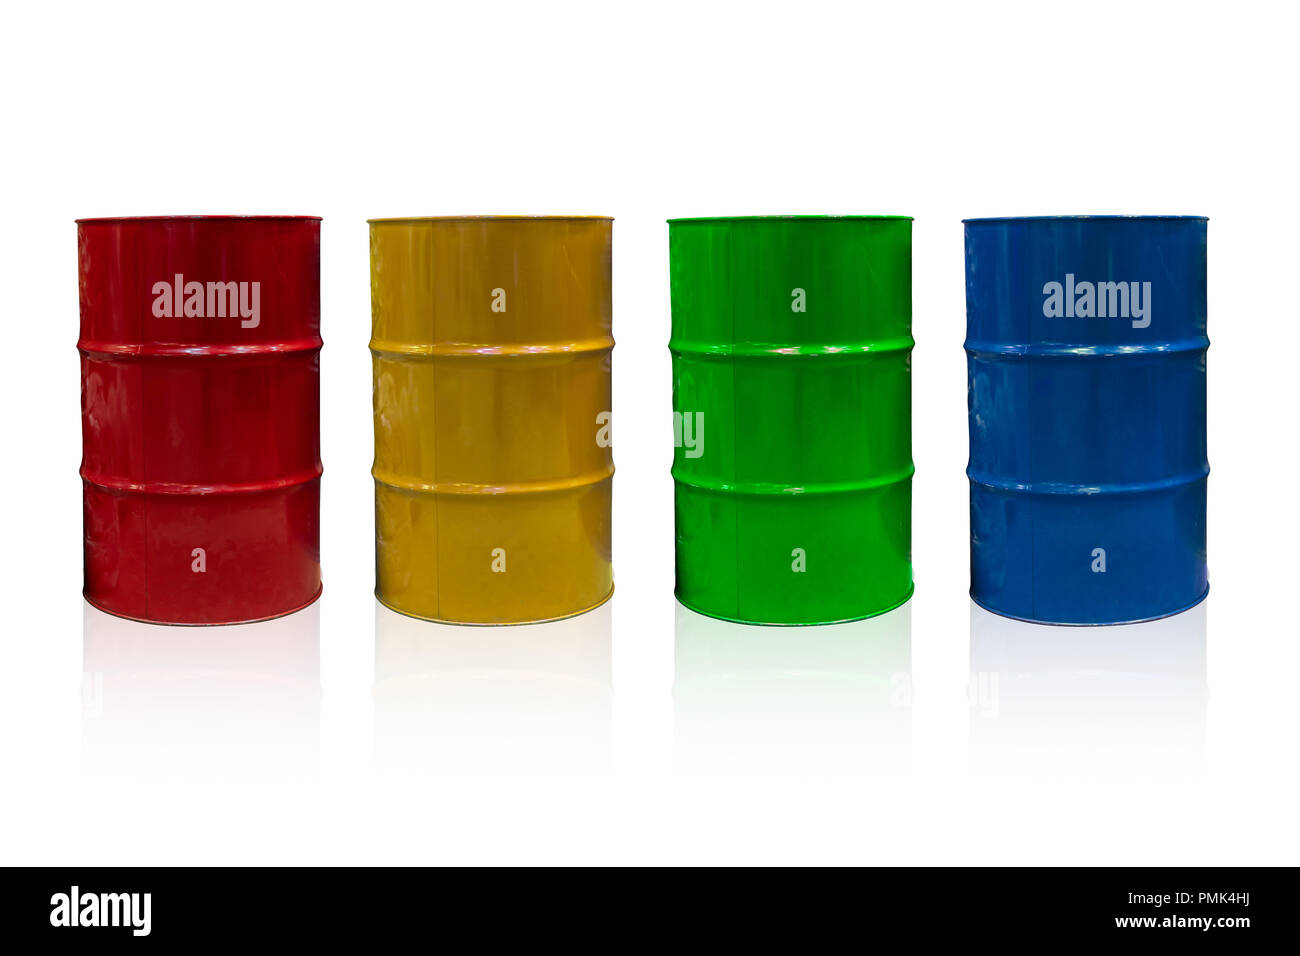 55 Gallon Steel Barrel tank for Industrial Liquid Chemical Container isolated on white with clipping path. Stock Photo